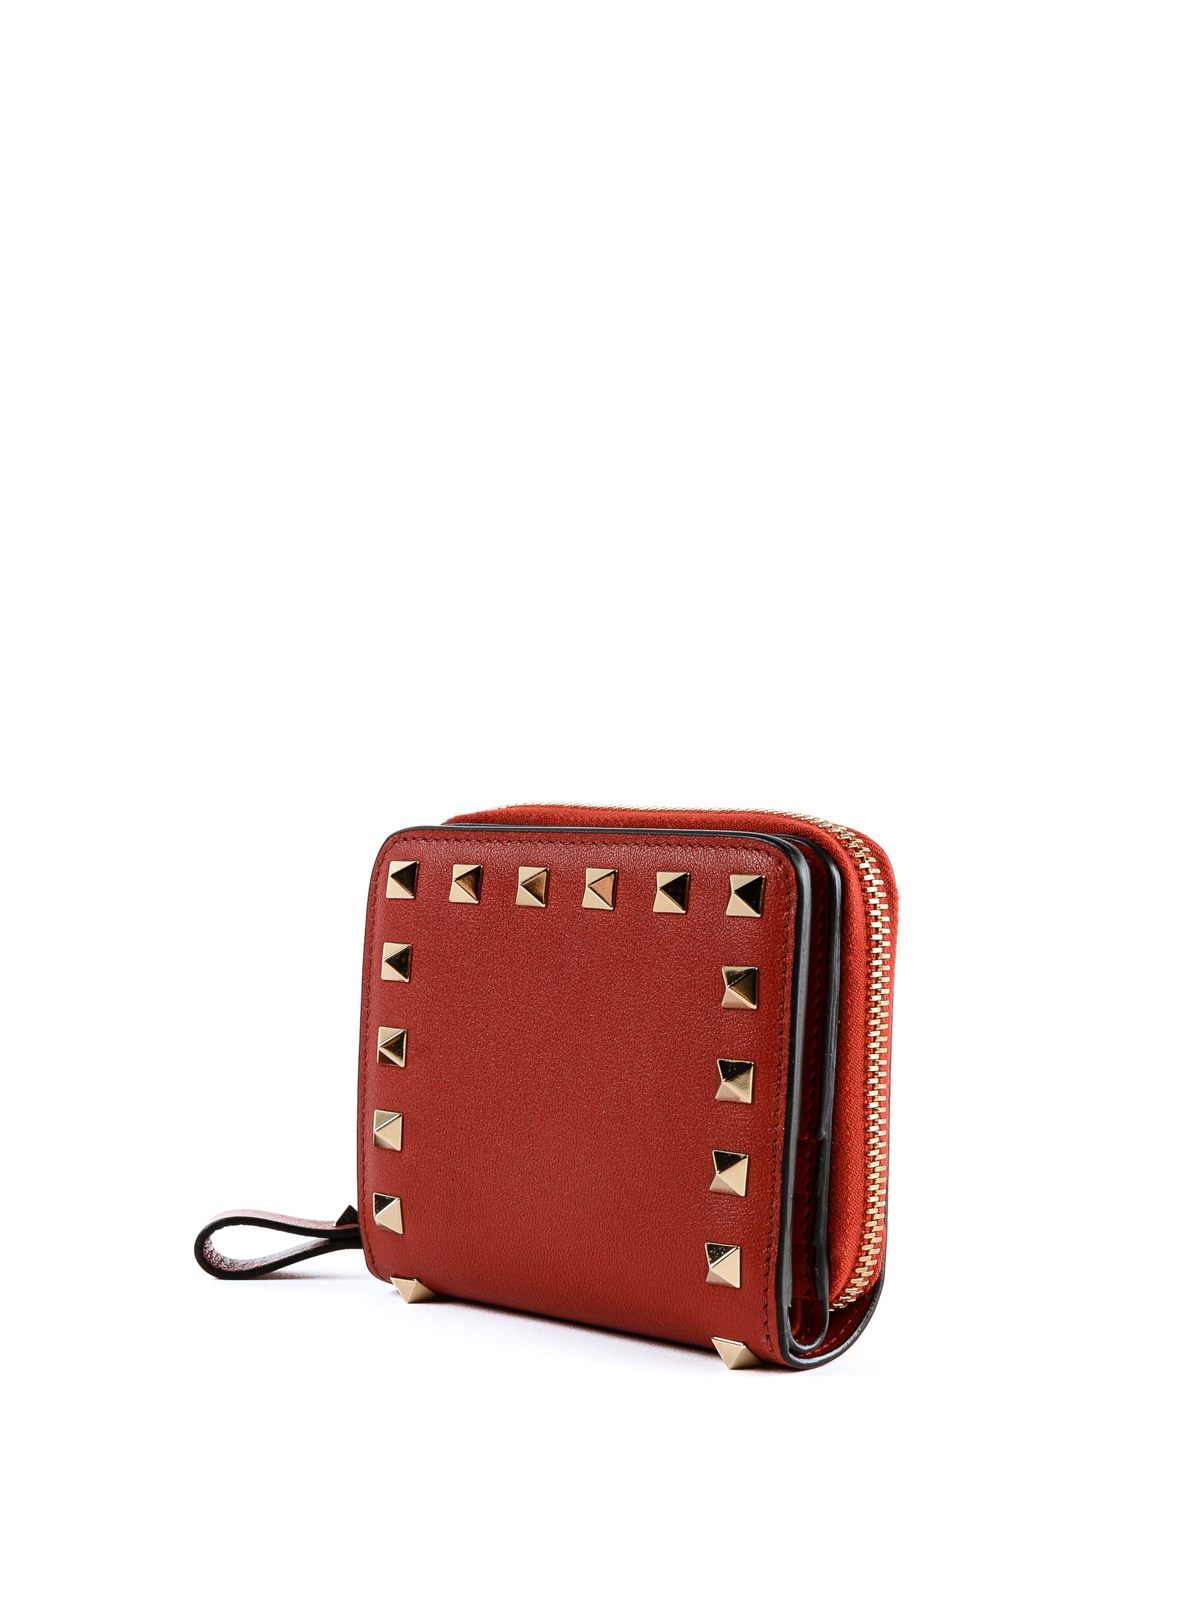 Wallets purses - Rockstud red leather french wallet - QW2P0649BOL0RO